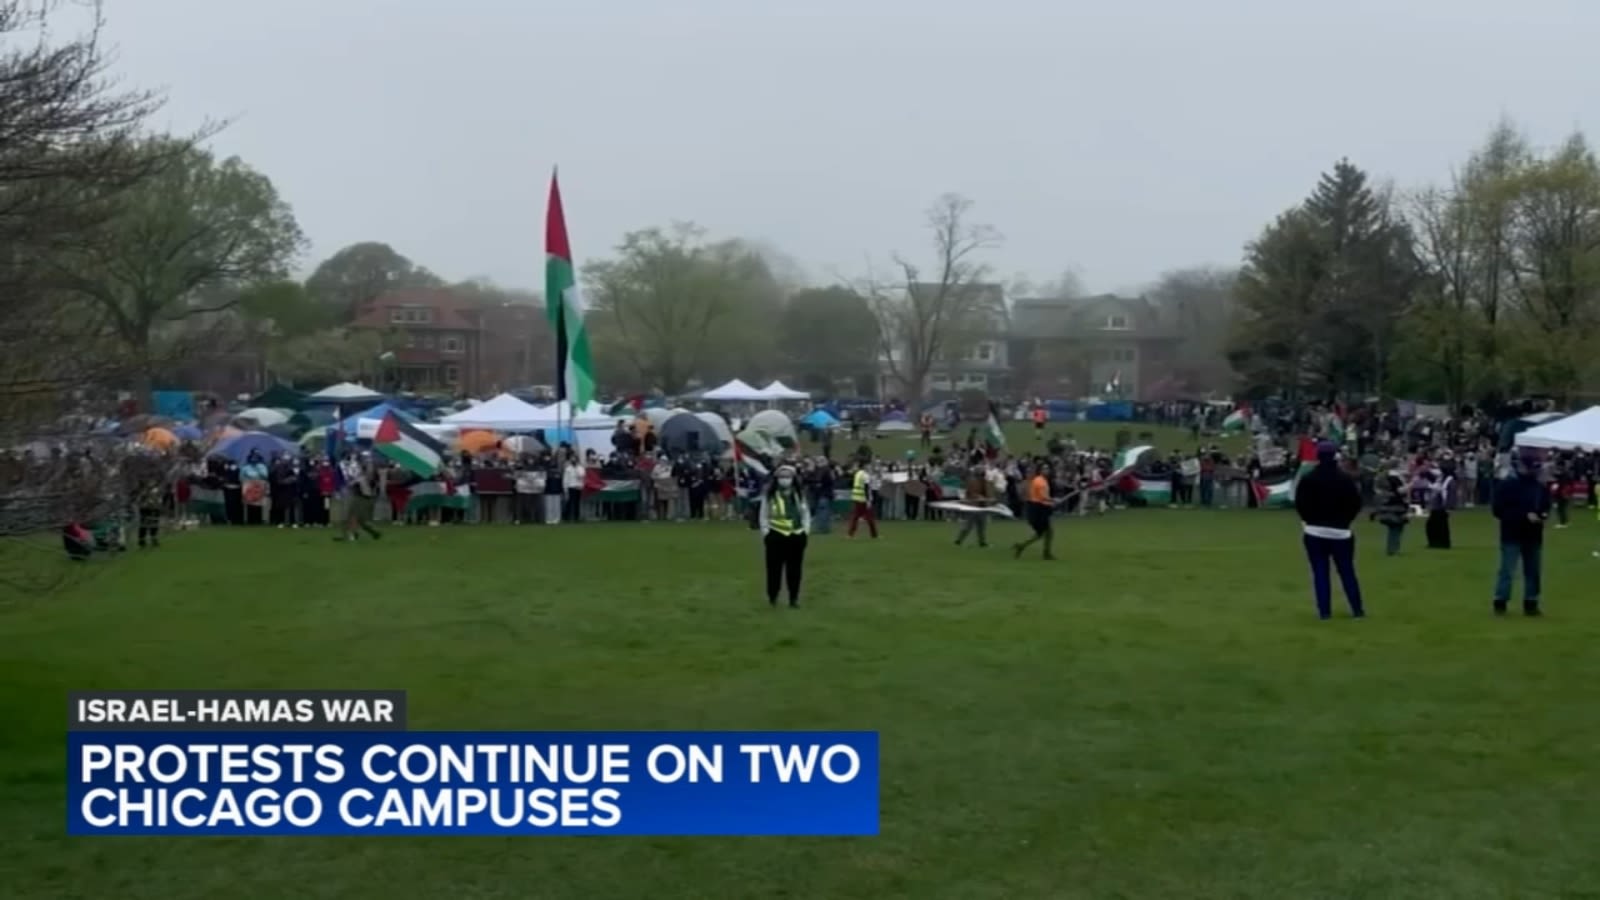 Chicago-area college protest organizers push back against accusations of antisemitism